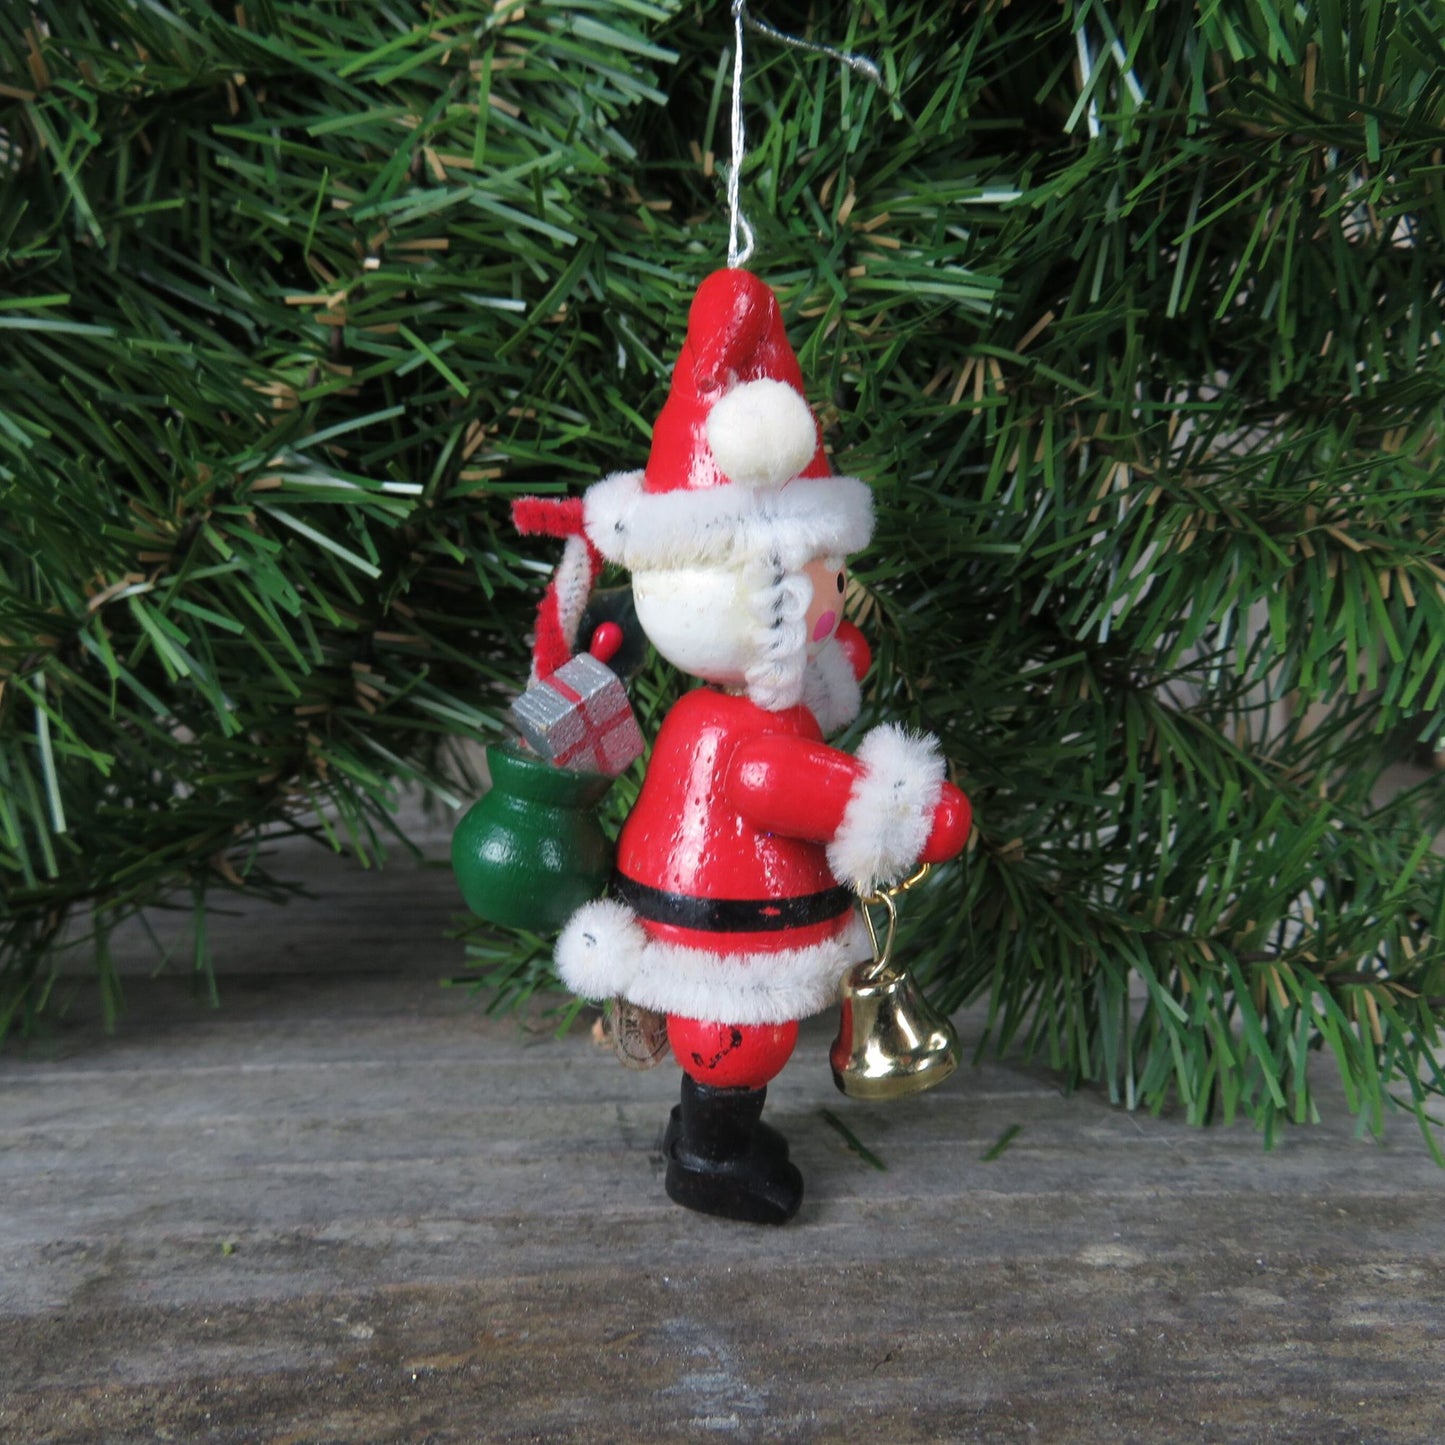 Vintage Wooden Santa Claus Ornament Kurt Adler Santa With Bell Bag and Pipe Cleaners Christmas 1982